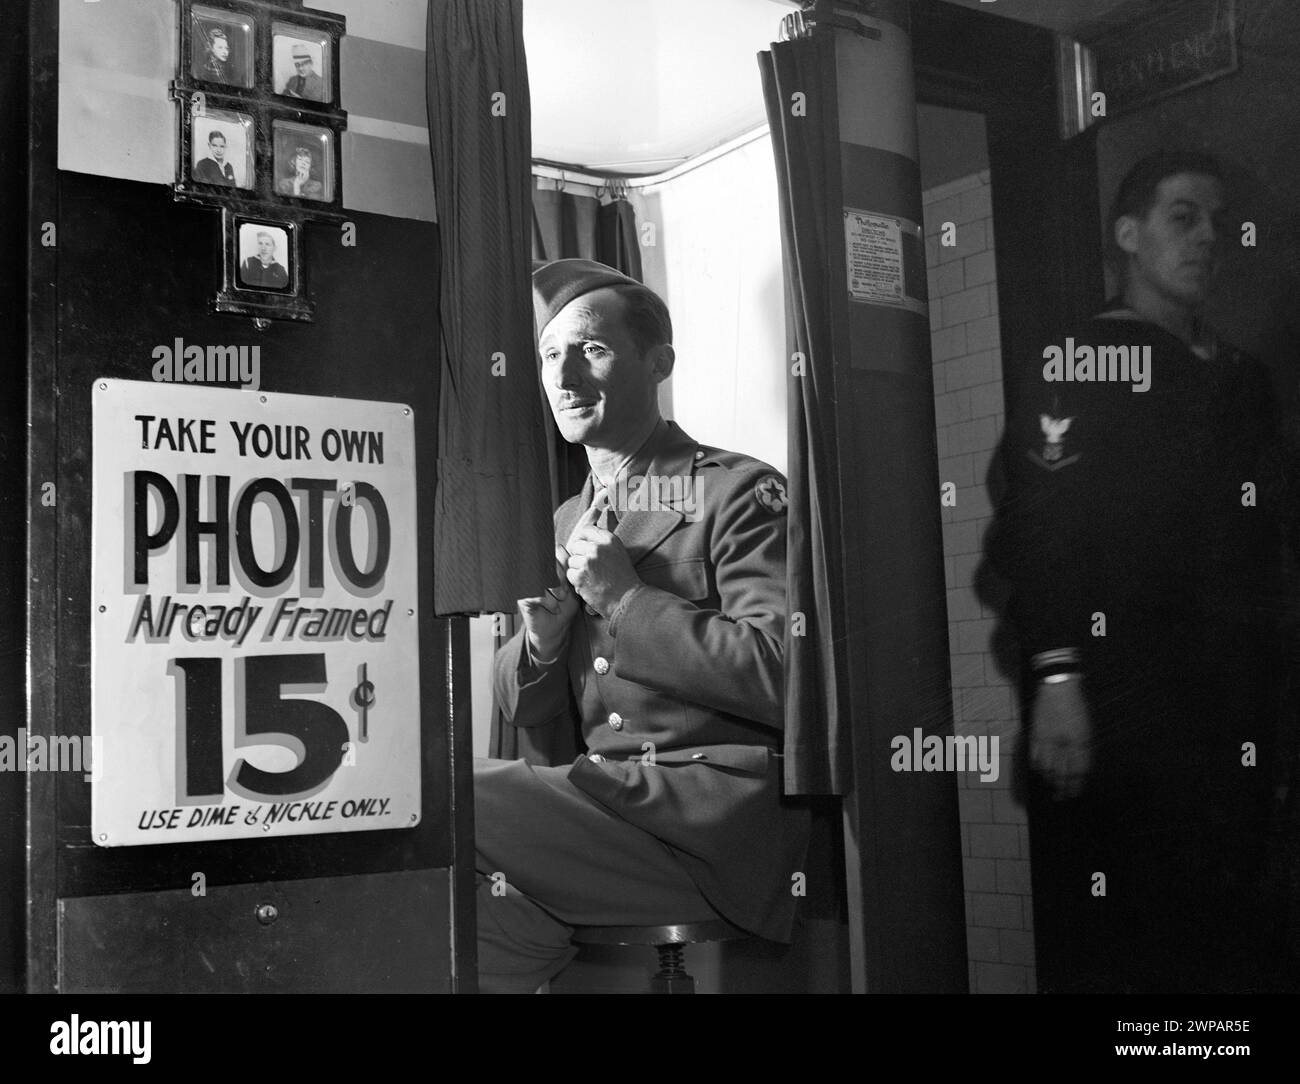 Man in military uniform sitting in  picture-taking machine in lobby at United Nations service center, Washington, D.C., USA, Esther Bubley, U.S. Office of War Information, December 1943 Stock Photo